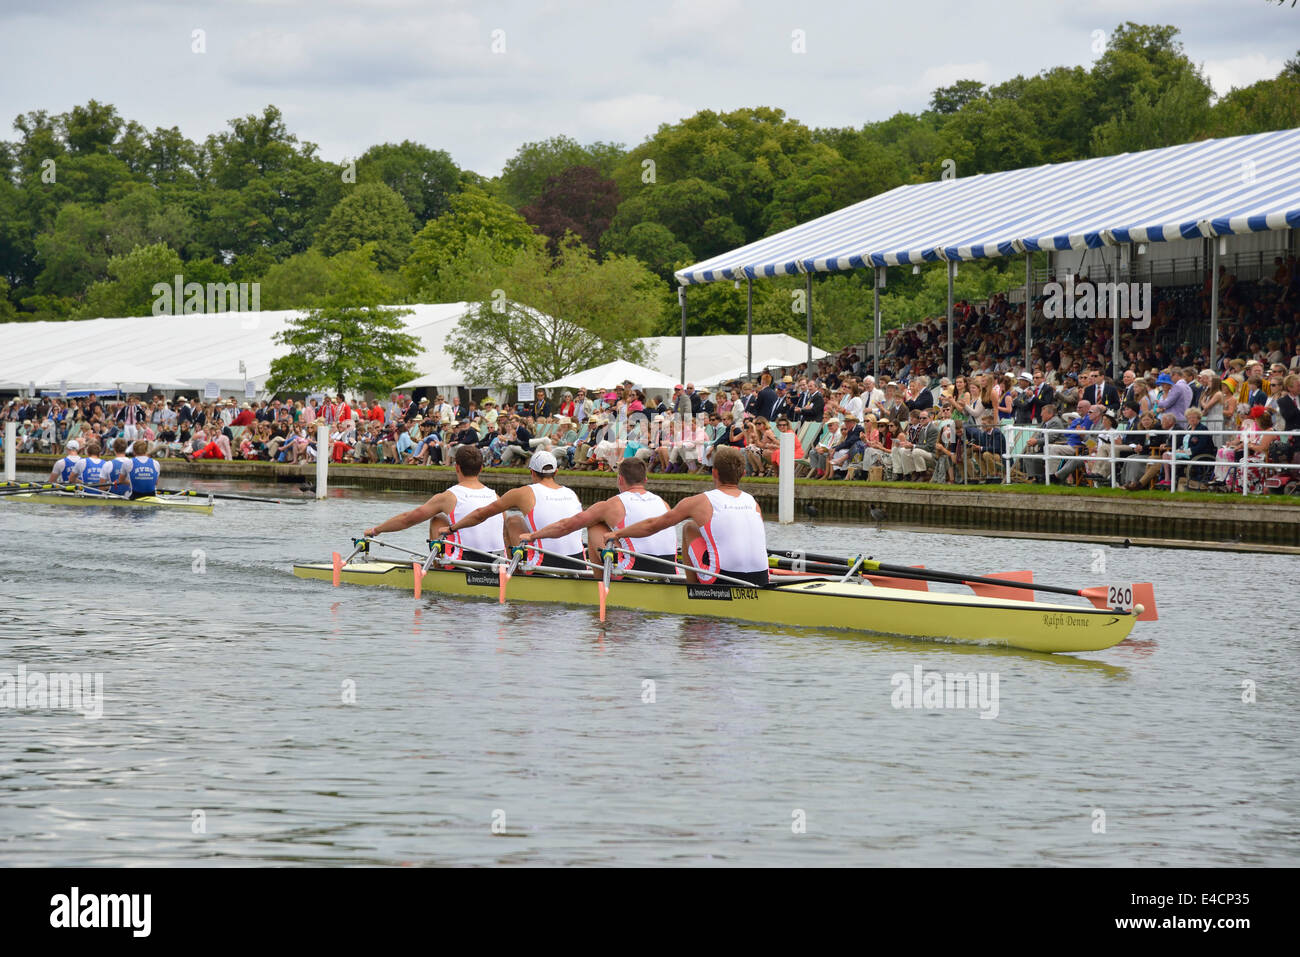 Henley Royal Regatta 2014, Henley on Thames, Oxfordshire, England, UK final of the Prince of Wales Challange Cup won by Leander. Stock Photo